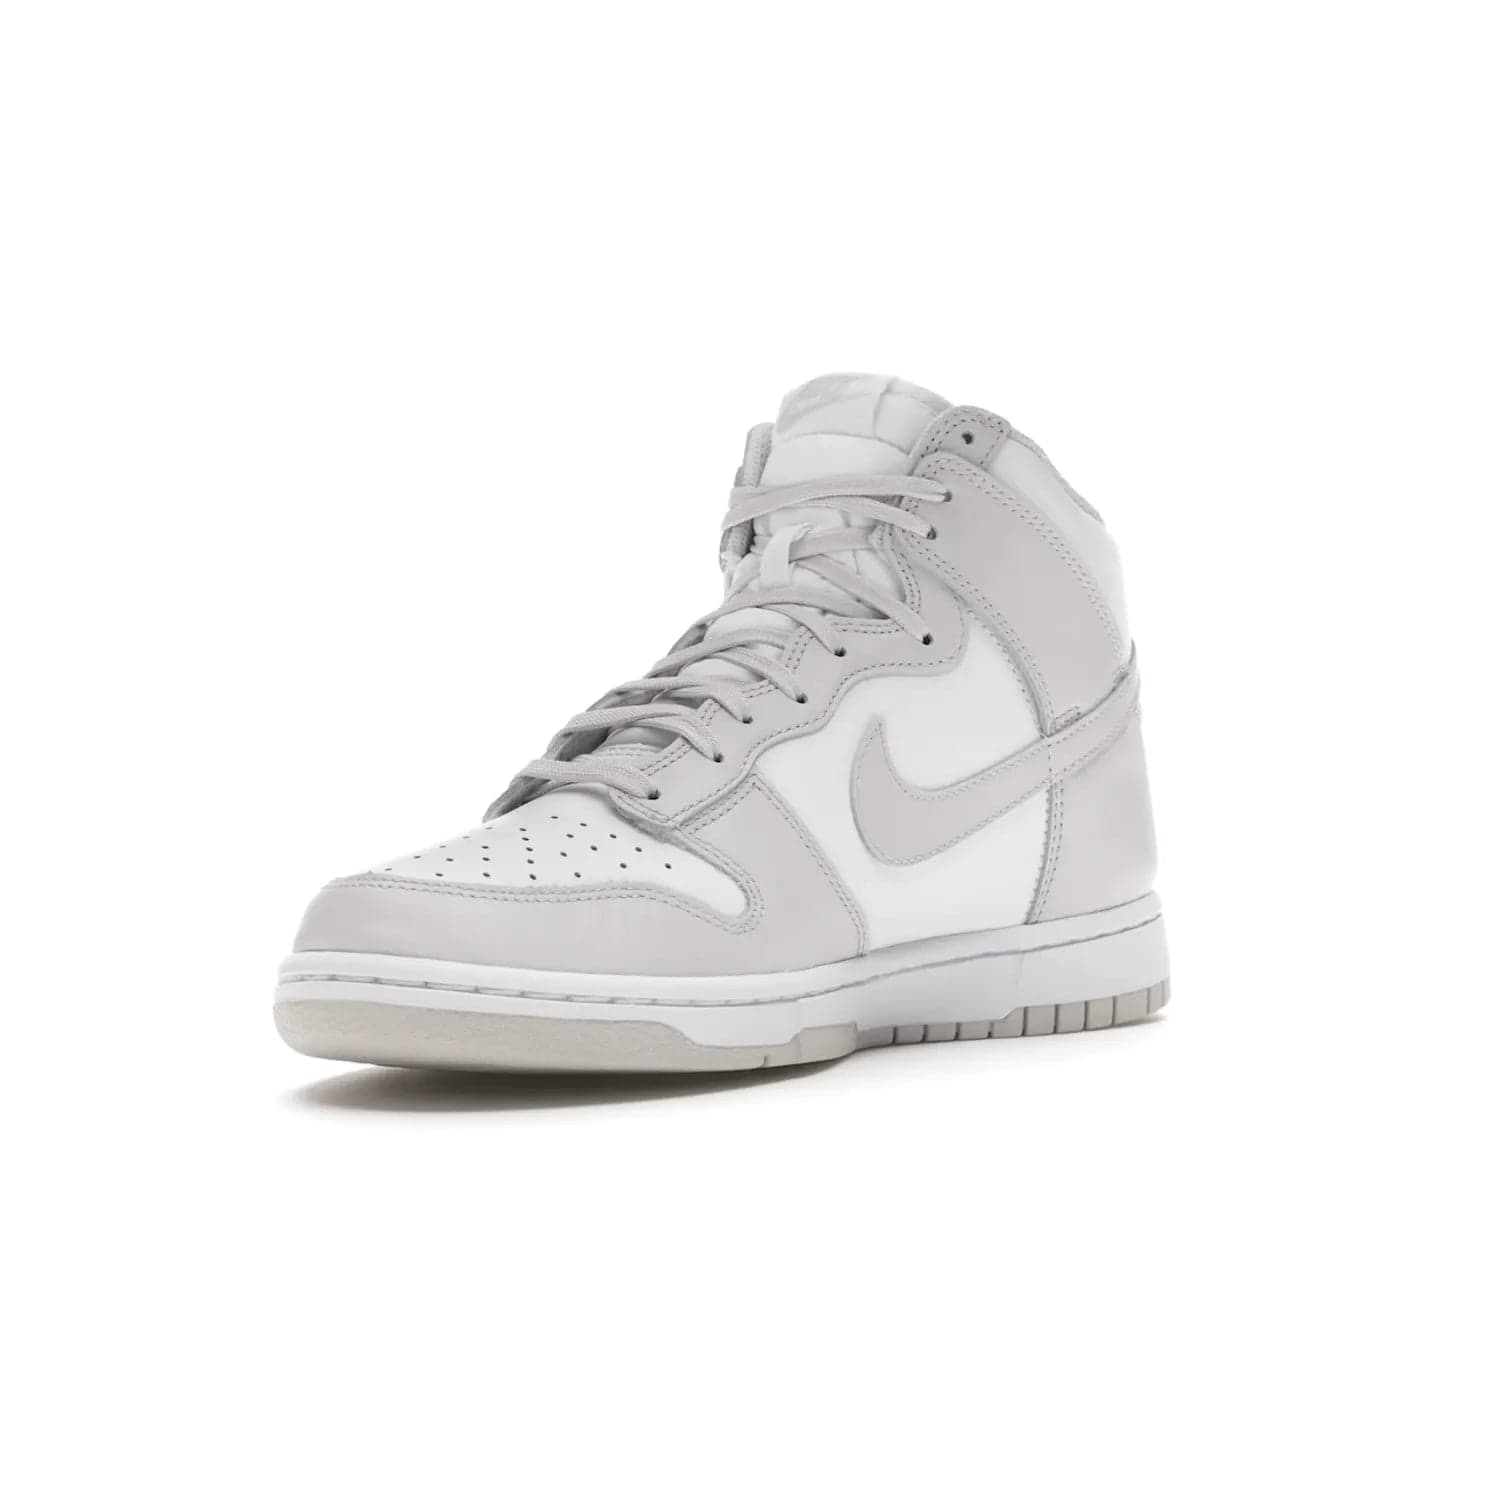 Nike Dunk High Retro White Vast Grey (2021) - Image 14 - Only at www.BallersClubKickz.com - Nike Dunk High Retro White Vast Grey 2021: classic '80s basketball sneaker with a crisp white base, grey overlays, midsole tooling and outsole. Dropped Feb. 2021.